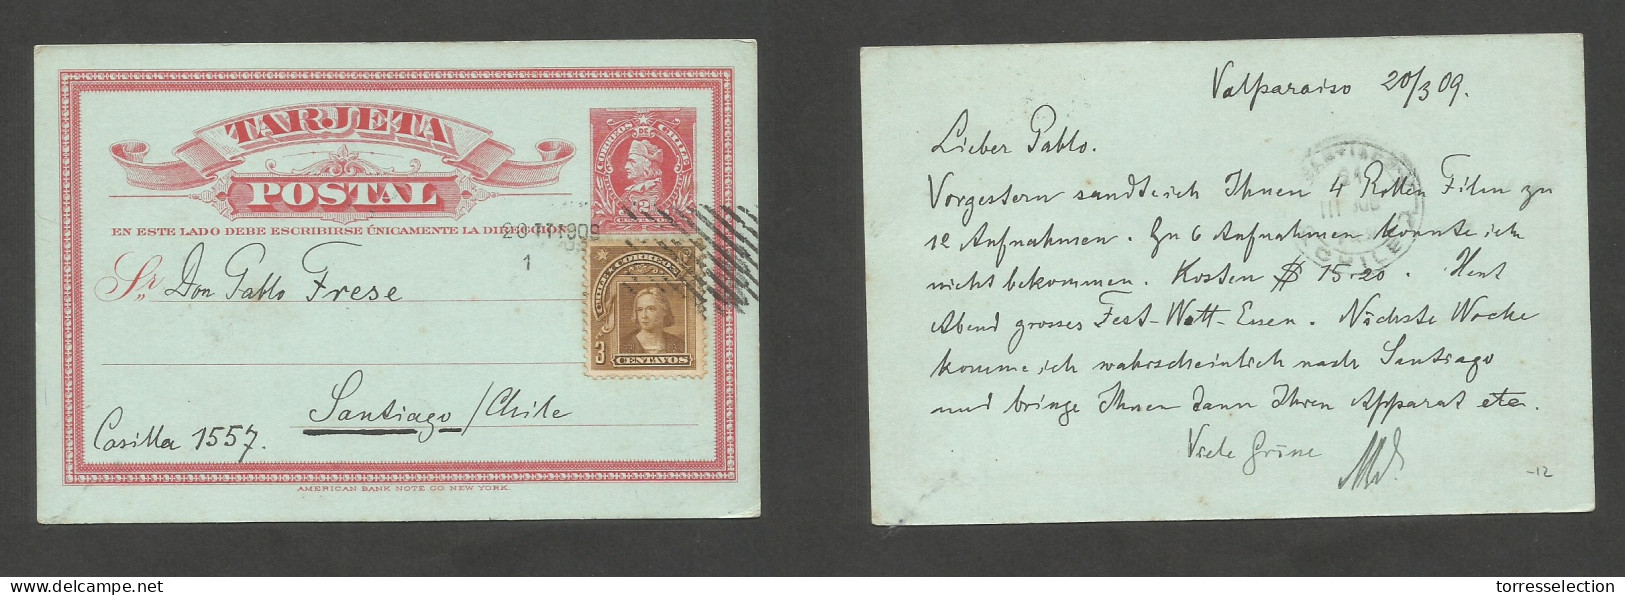 CHILE - Stationery. 1909 (20 March) Valp - Stgo. 2c Red Stat Card + 3c Brown Adtl, Tied Rolling Grill. Nice Item. SALE. - Chili